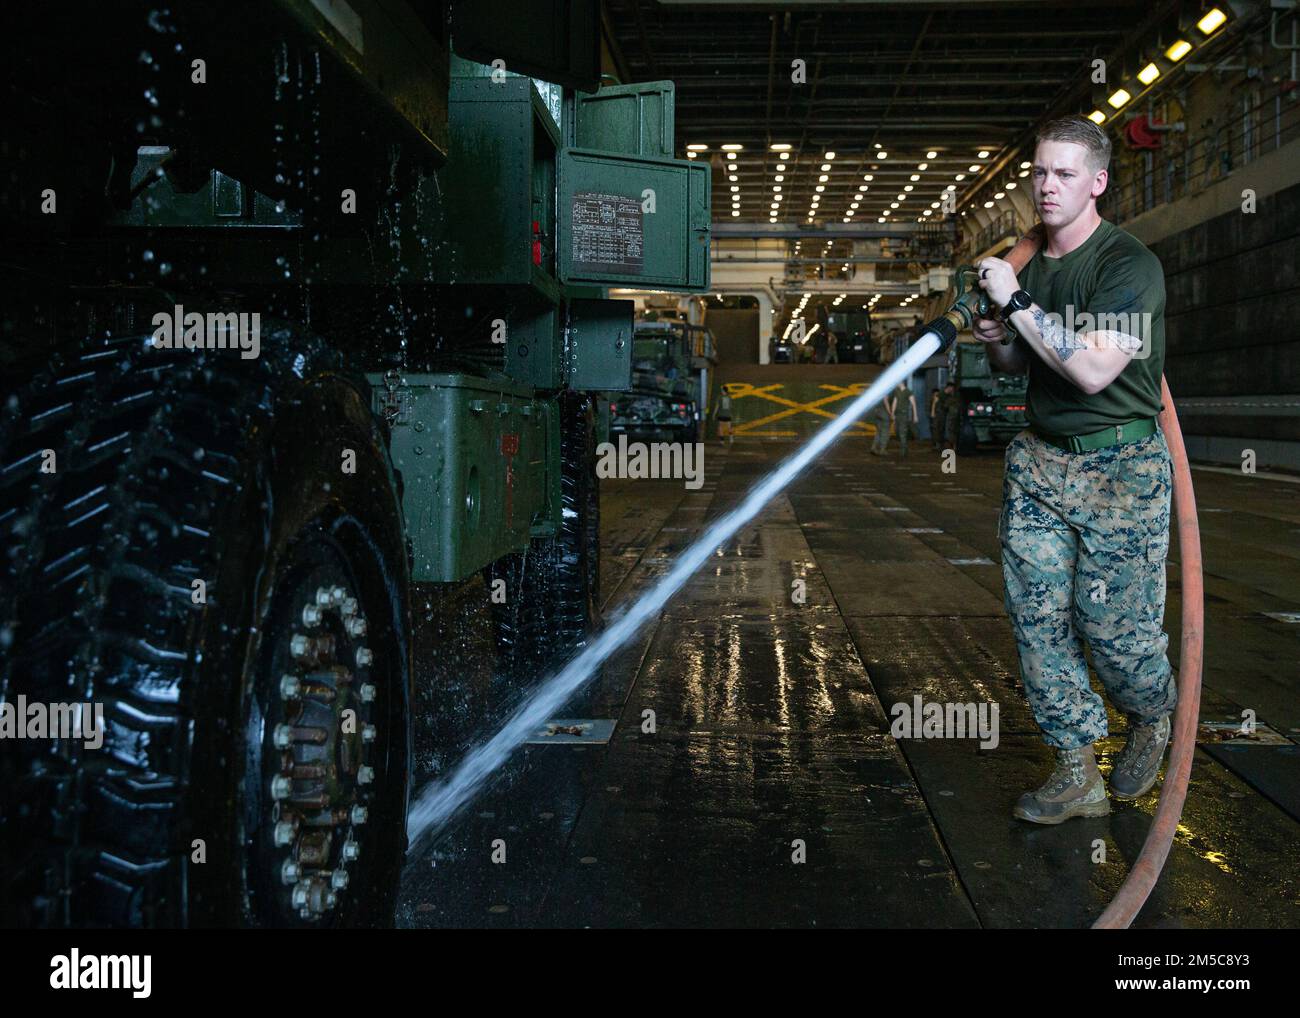 U.S. Marine Corps Cpl. Jordan Zubieta, a High Mobility Artillery Rocket System operator with Combat Logistics Battalion (CLB) 31, sprays tires during a truck wash down aboard USS Green Bay, Gulf of Thailand, Feb. 28, 2022. The 31st MEU is operating aboard the ships of the America Amphibious Strike Group in the 7th fleet area of operations to enhance interoperability with allies and partners and serve as a ready response to defend peace and stability in the Indo–Pacific Region. Stock Photo